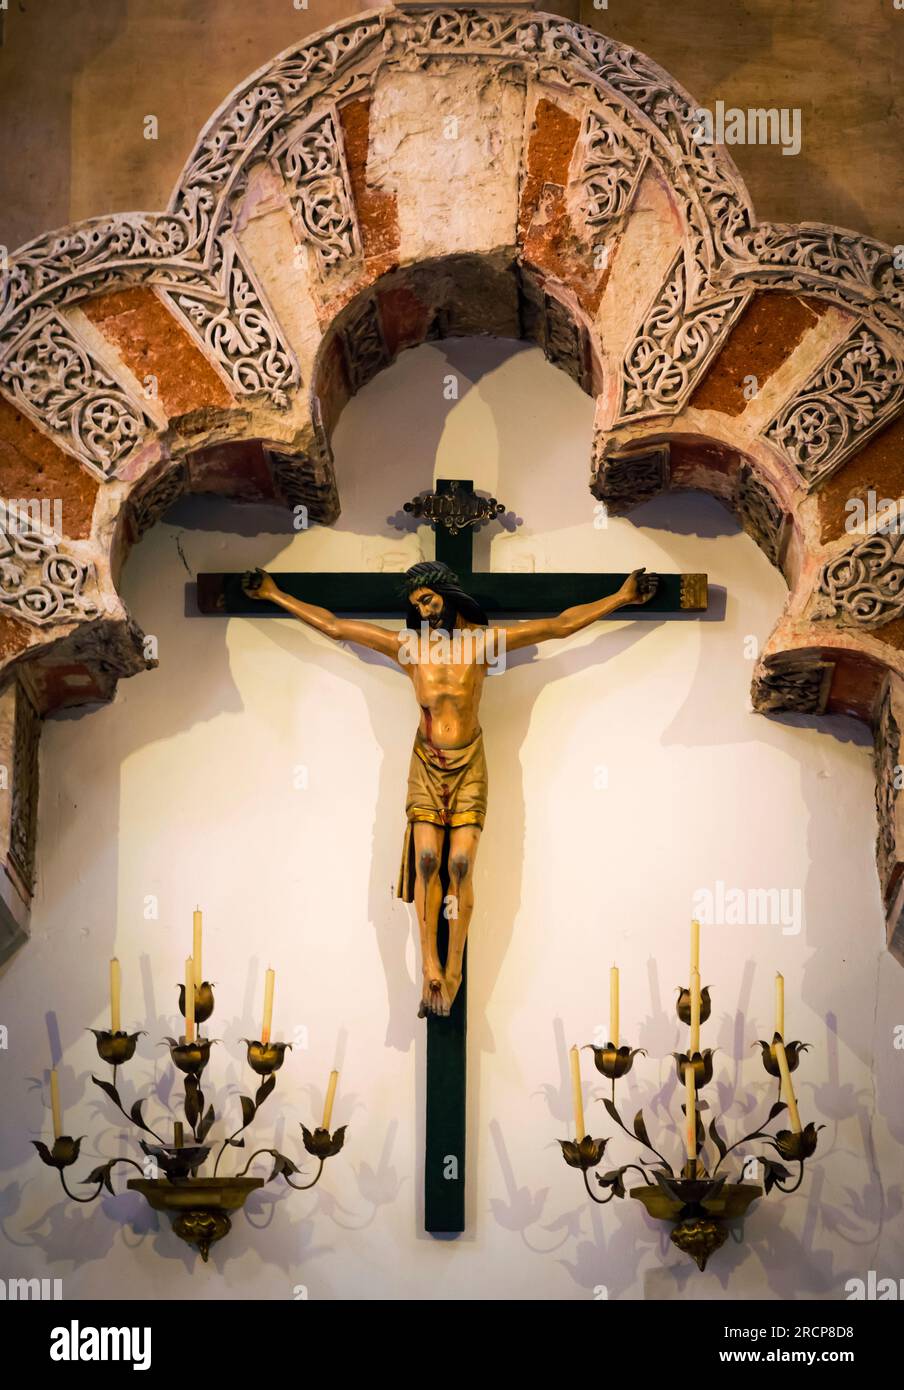 Cordoba, Cordoba Province, Andalusia, southern Spain.  Interior of the Great Mosque, La Mezquita.  A crucifix, symbol of Christianity, hangs beneath a Stock Photo